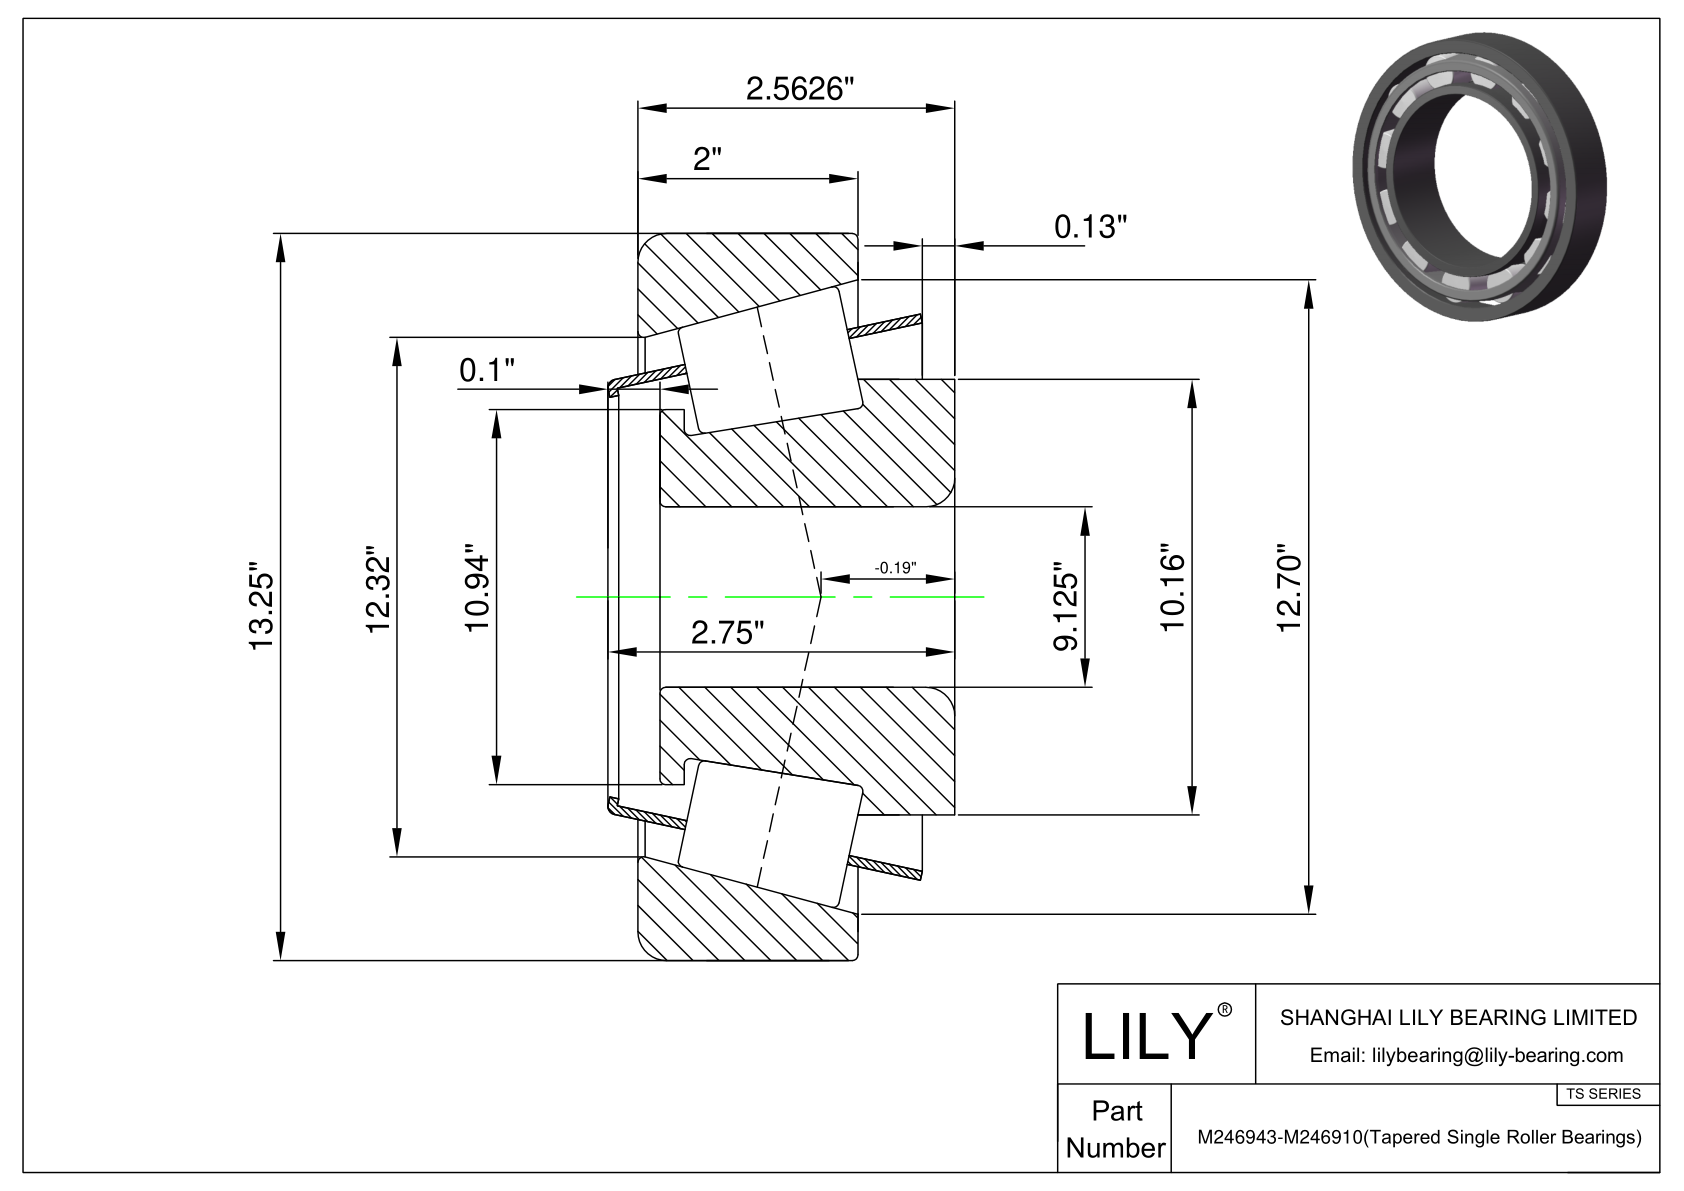 M246943-M246910 TS (Tapered Single Roller Bearings) (Imperial) cad drawing